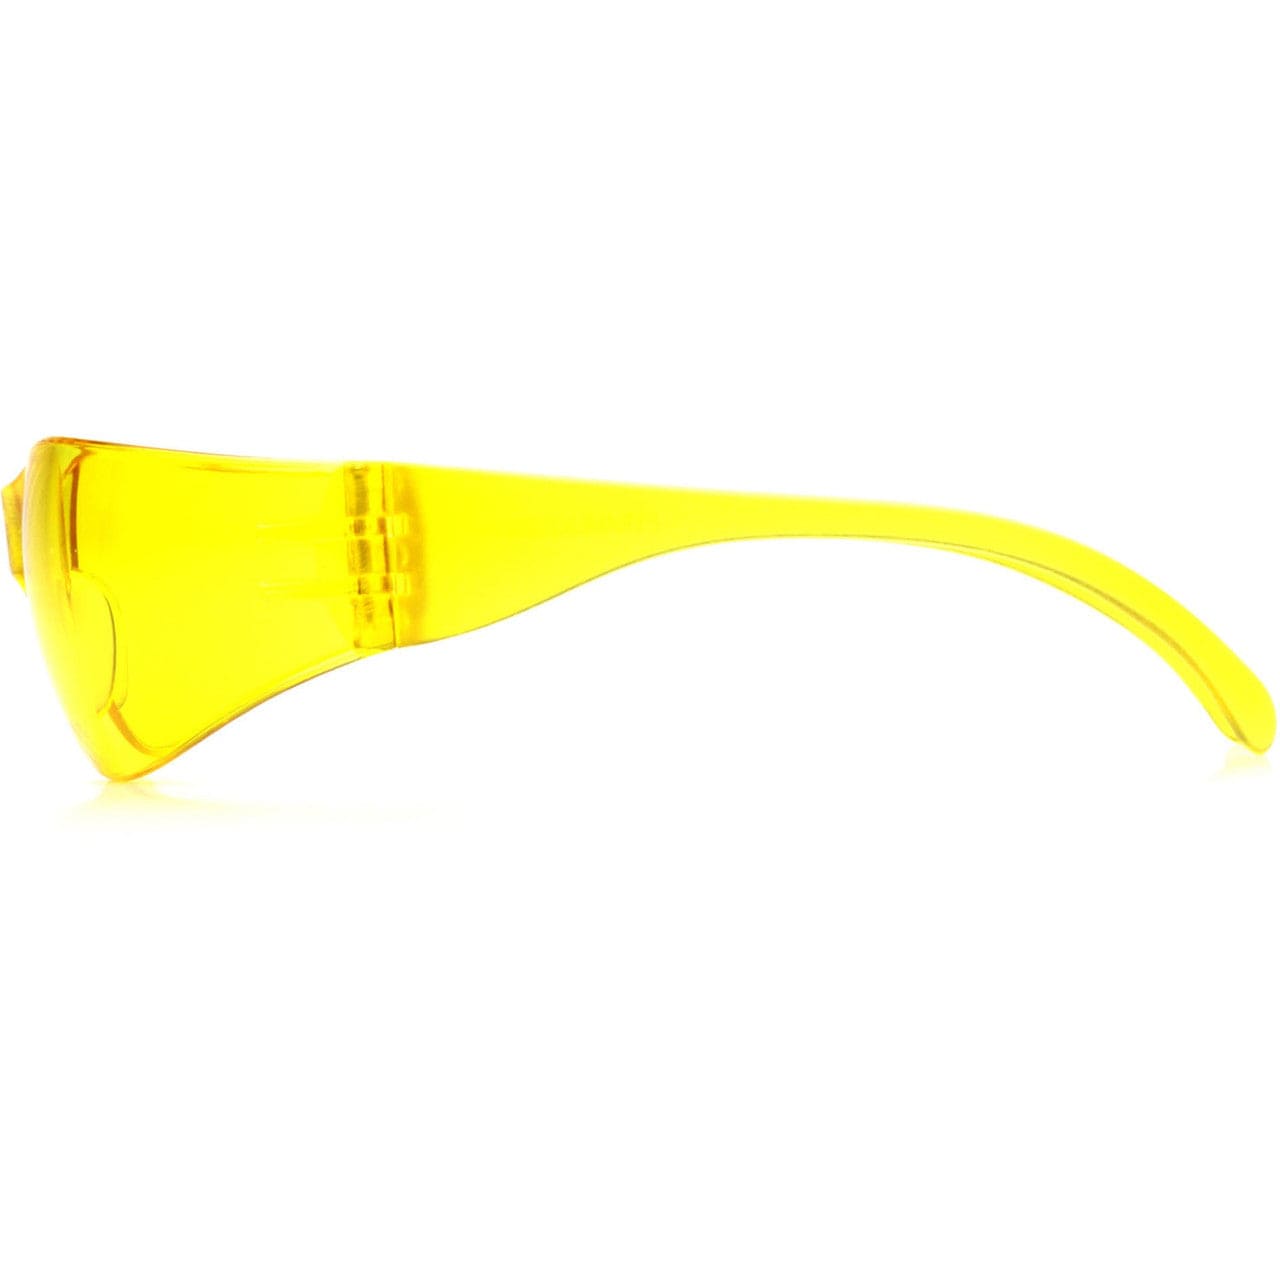 Pyramex Intruder Safety Glasses with Amber Lens S4130S Side View